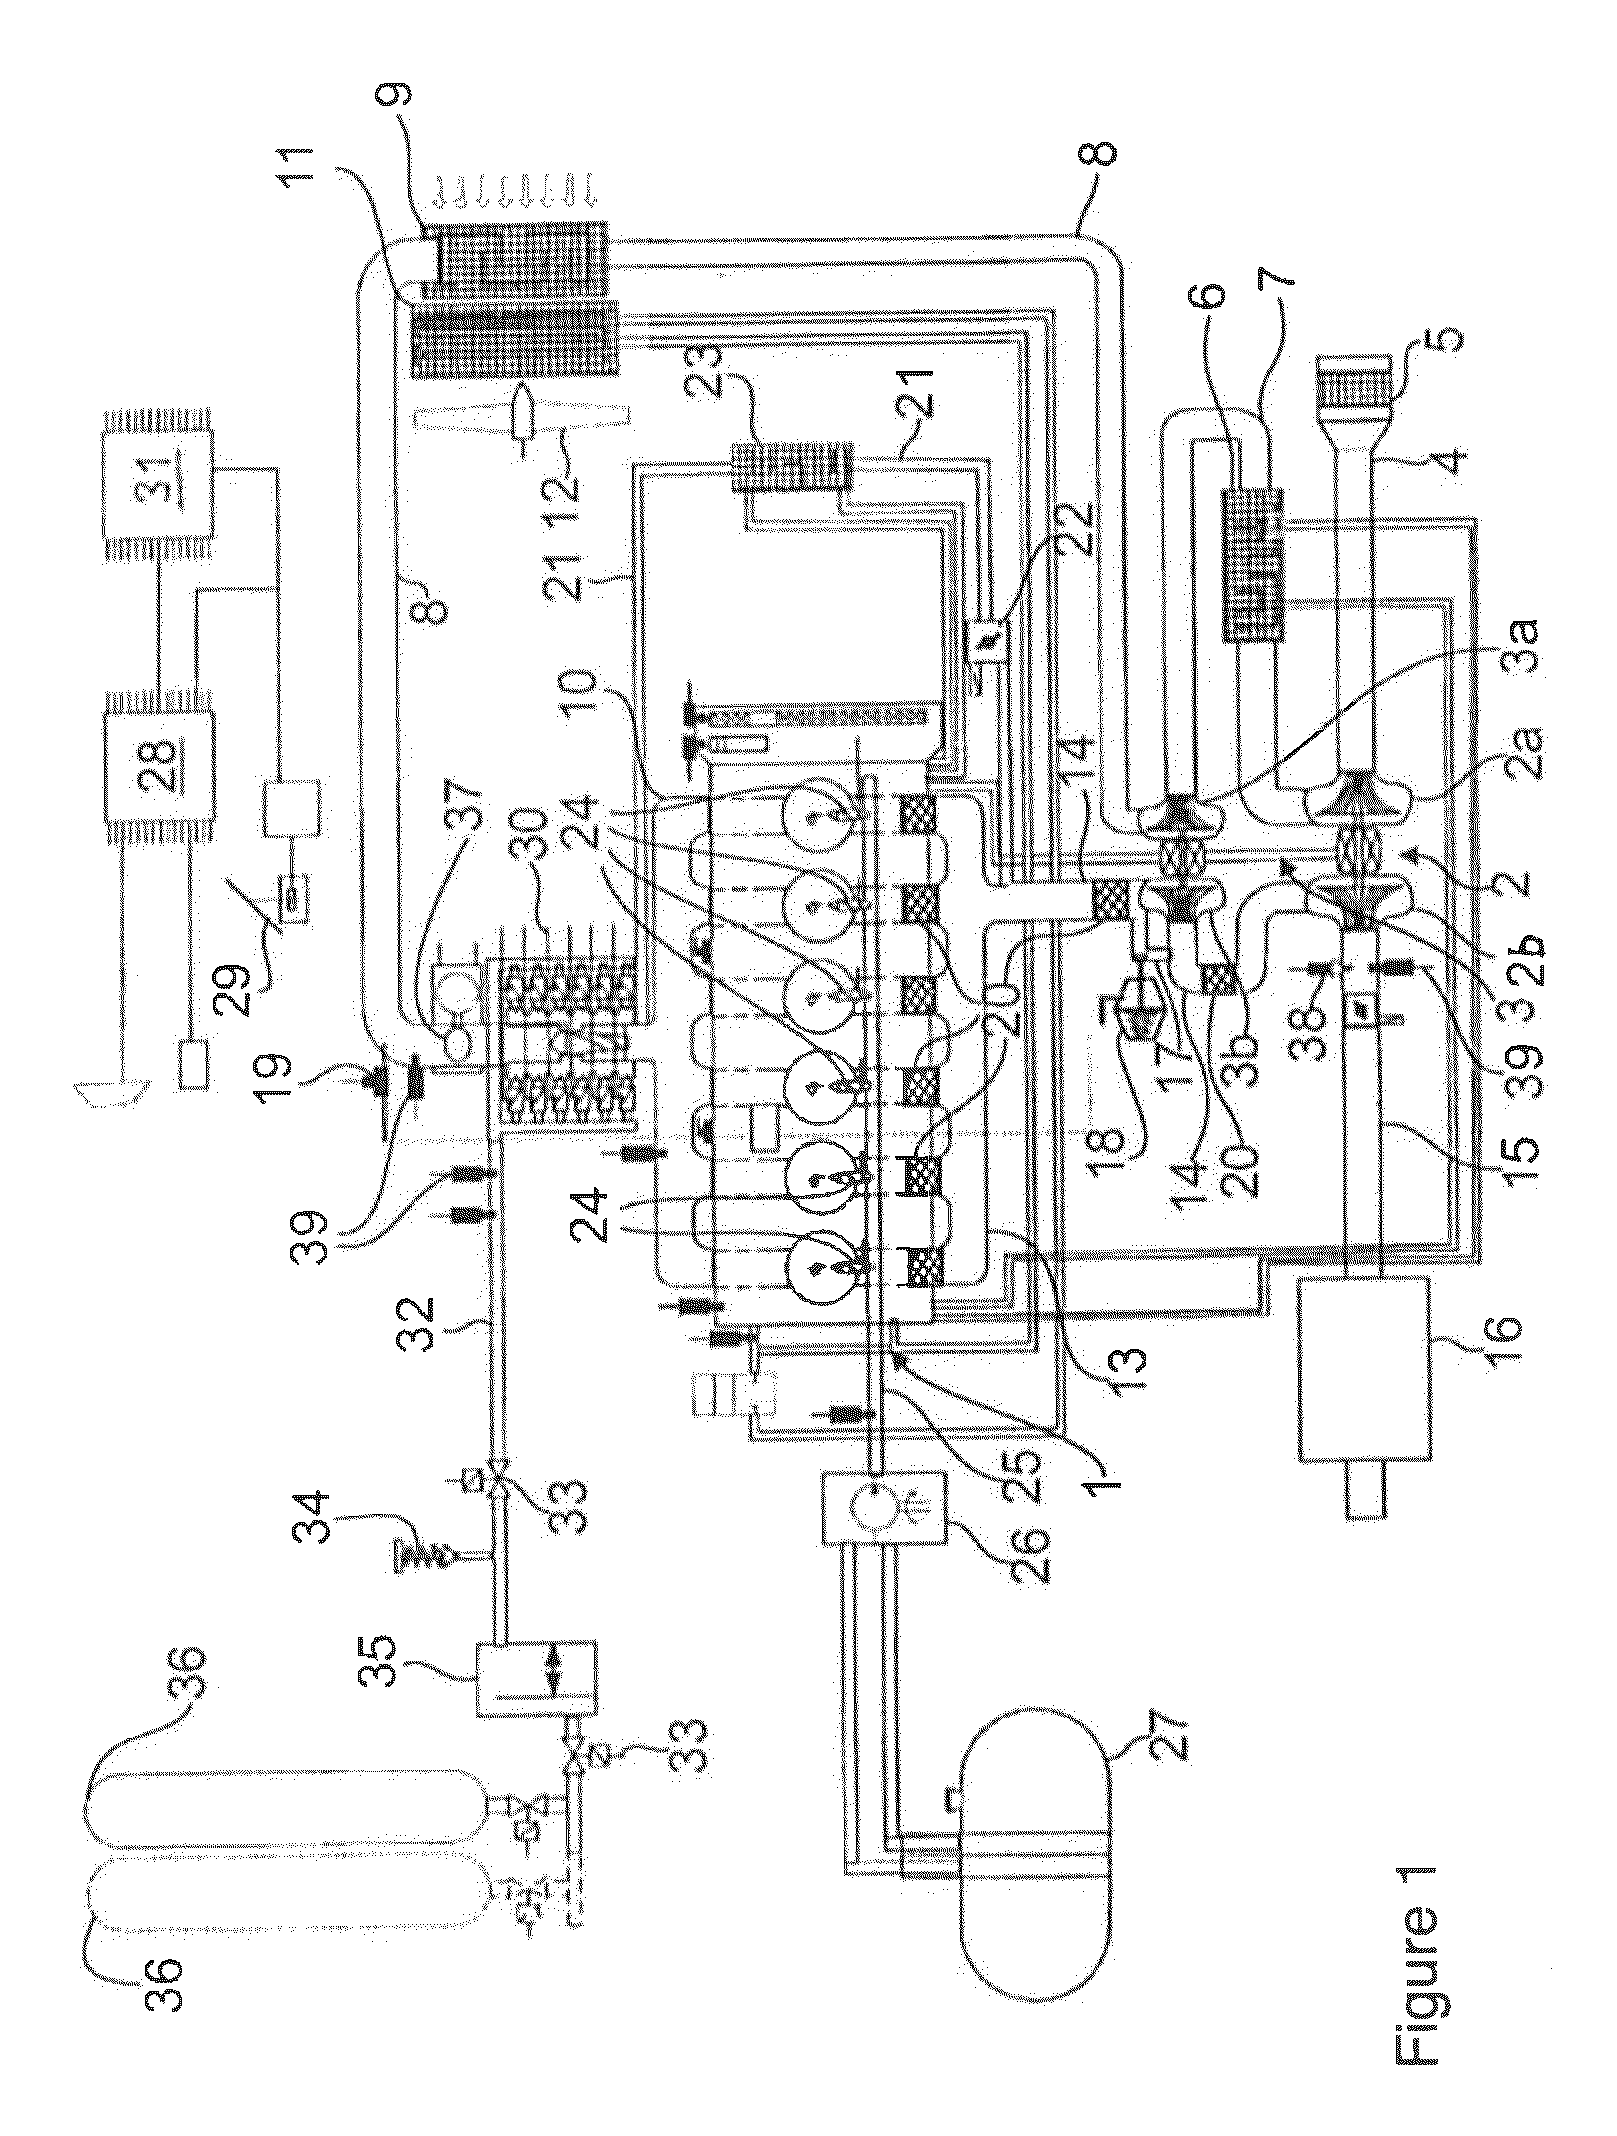 Method for operating an auto-ignition internal combustion engine